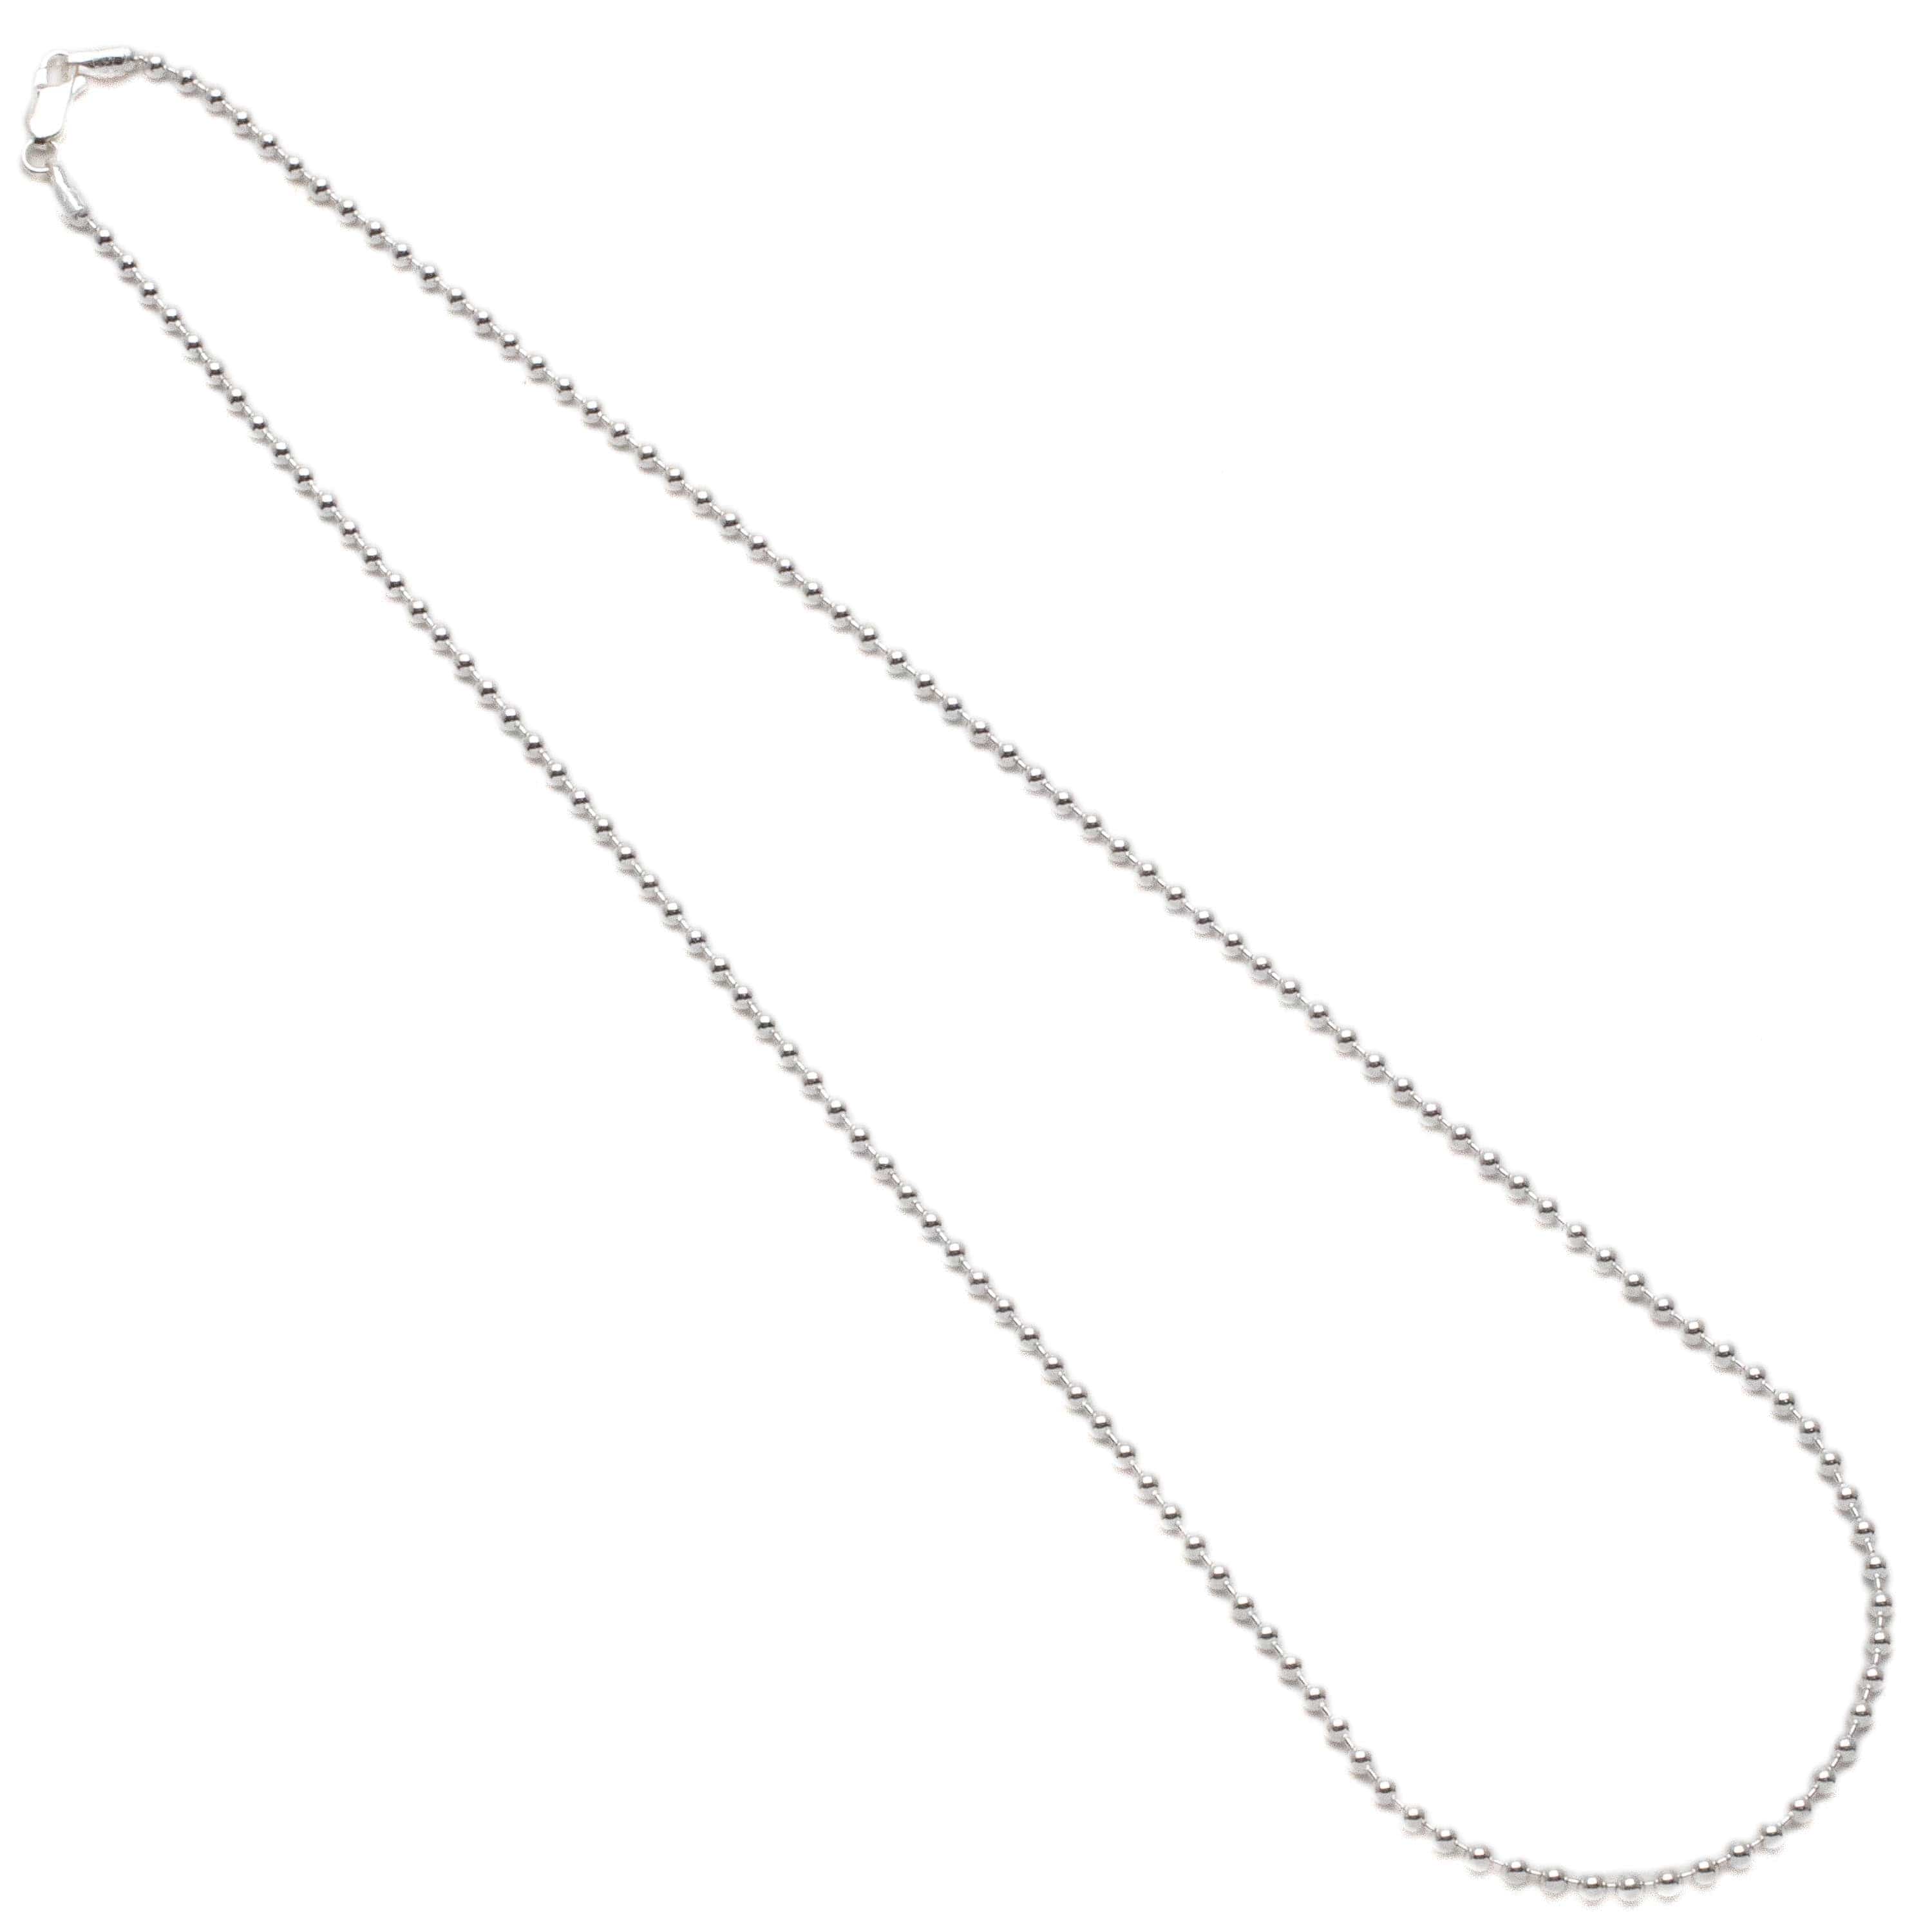 Kalifano Sterling Silver Chains 22" Italian Sterling Silver Round Beaded Chain Necklace 3mm SC-BD300-22